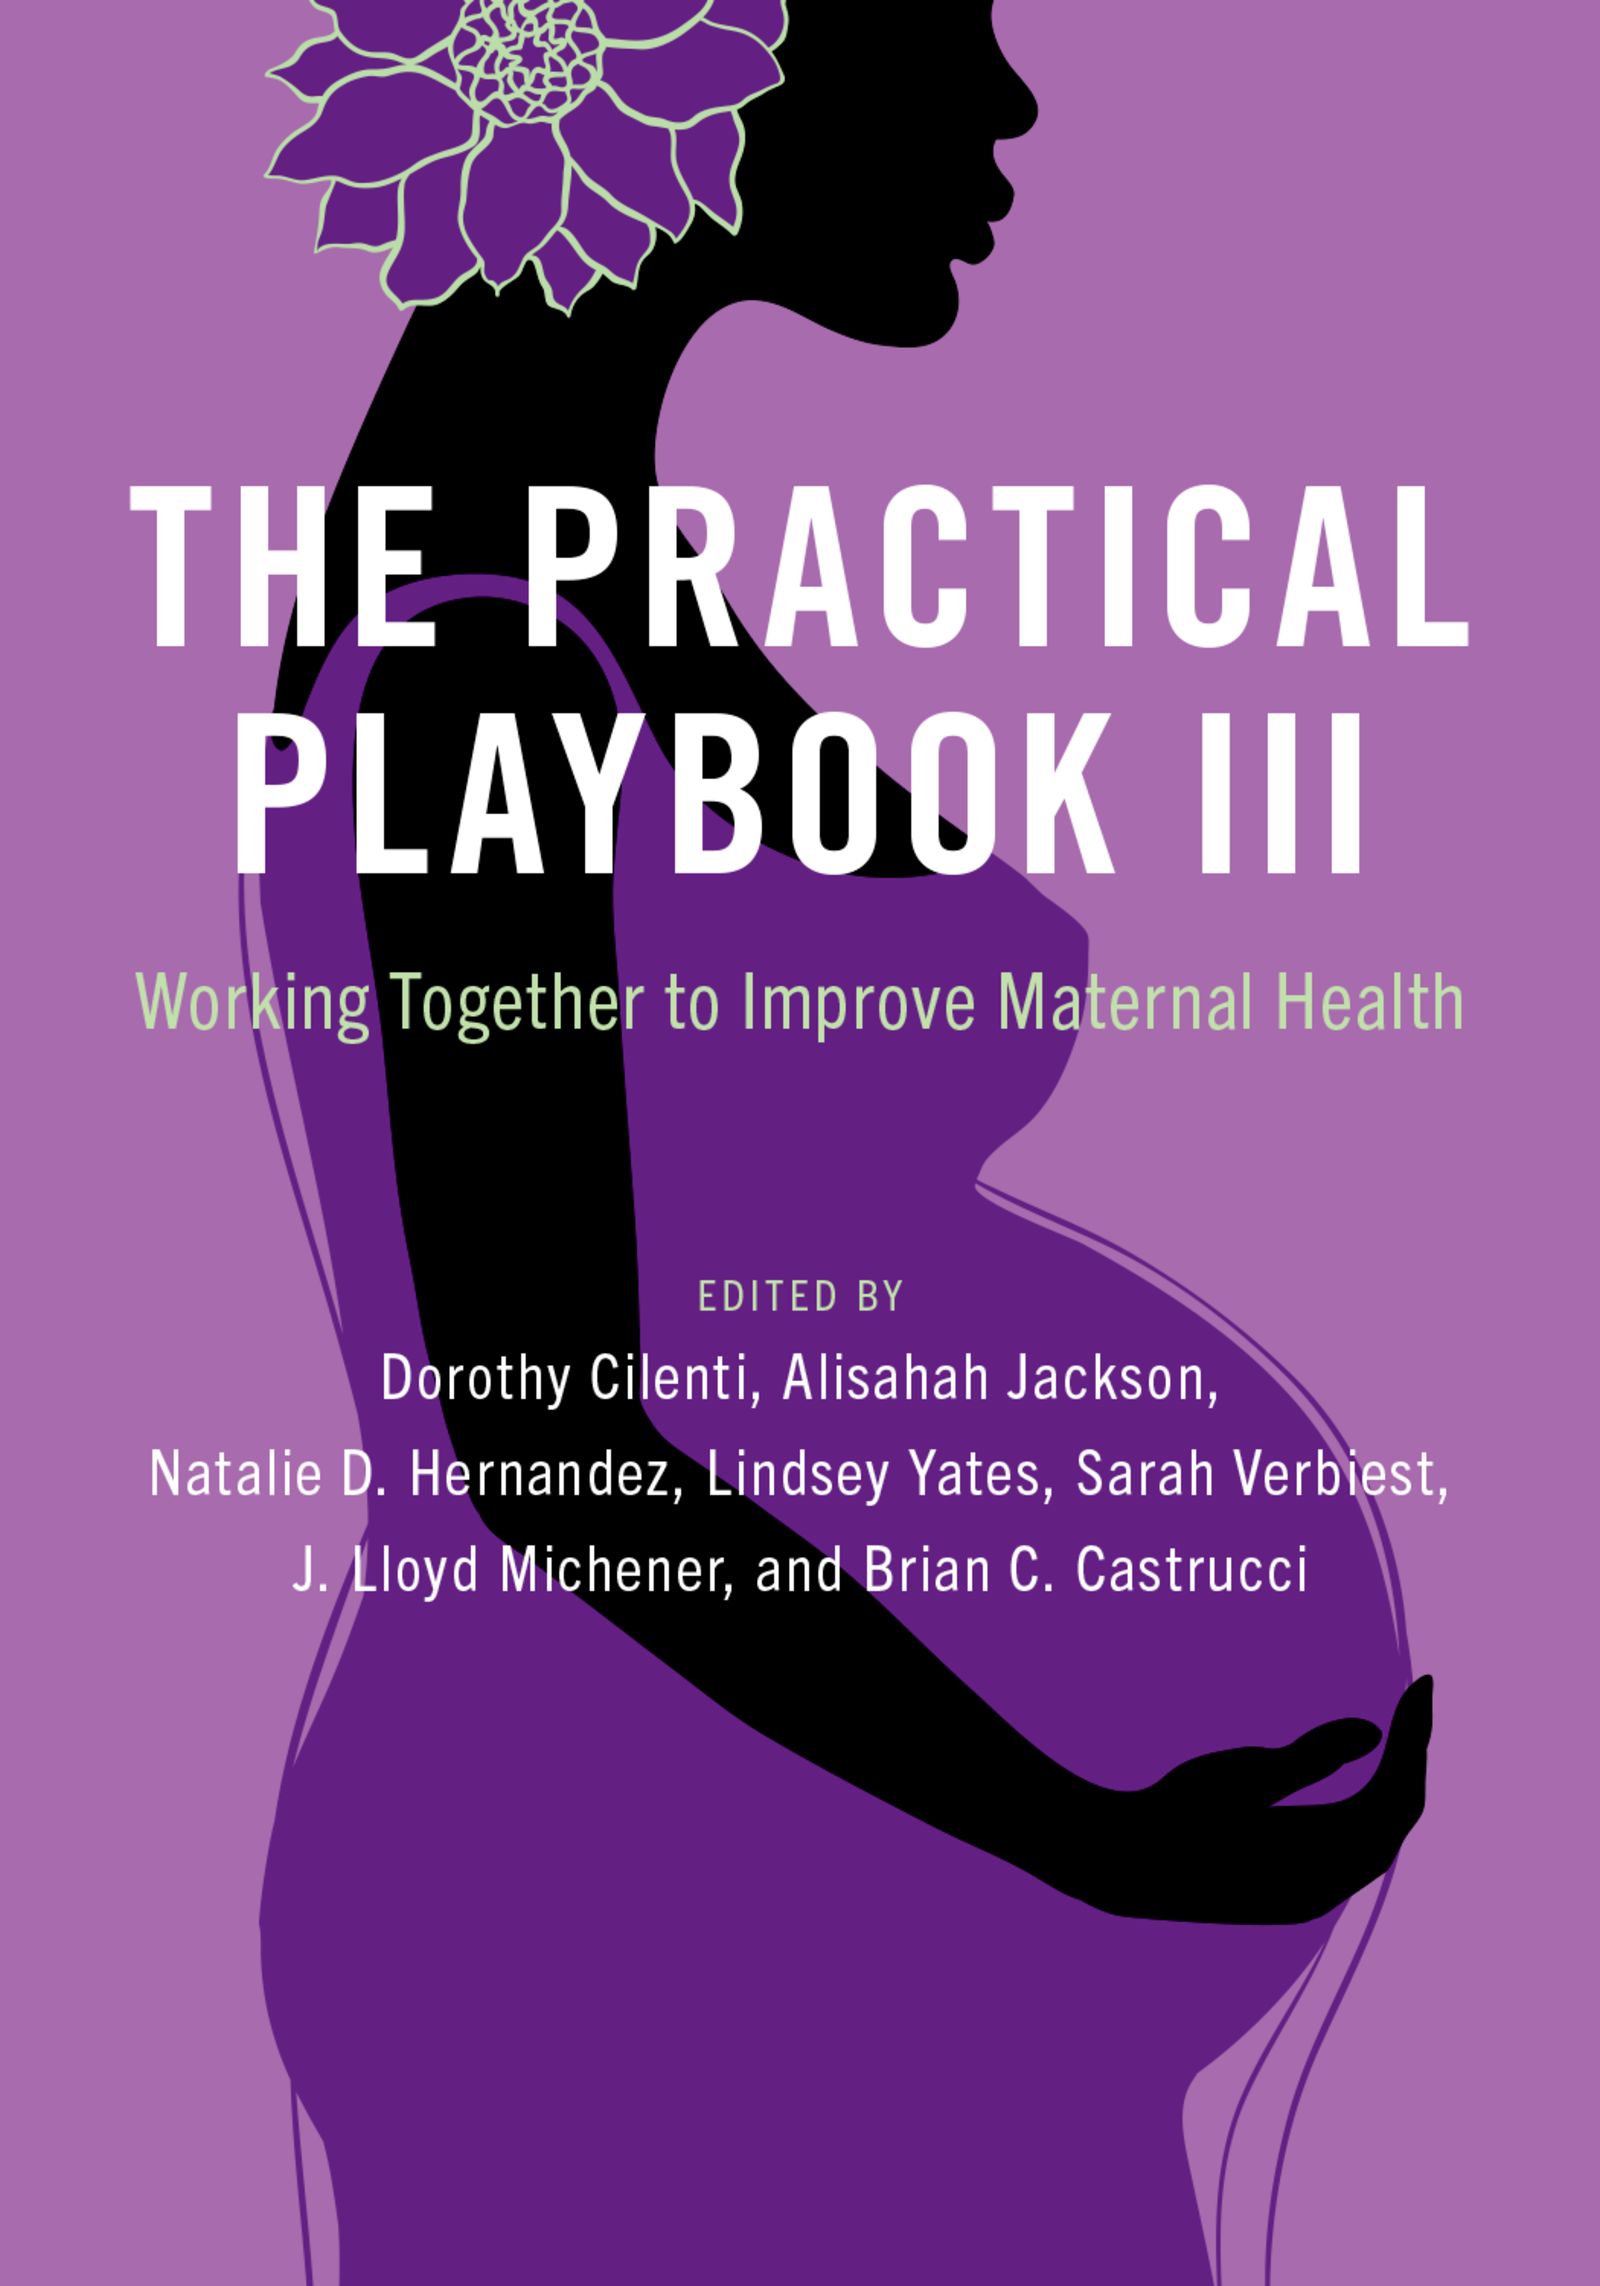 Cover of The Practical Playbook III featuring the silhouette of a pregnant person. 